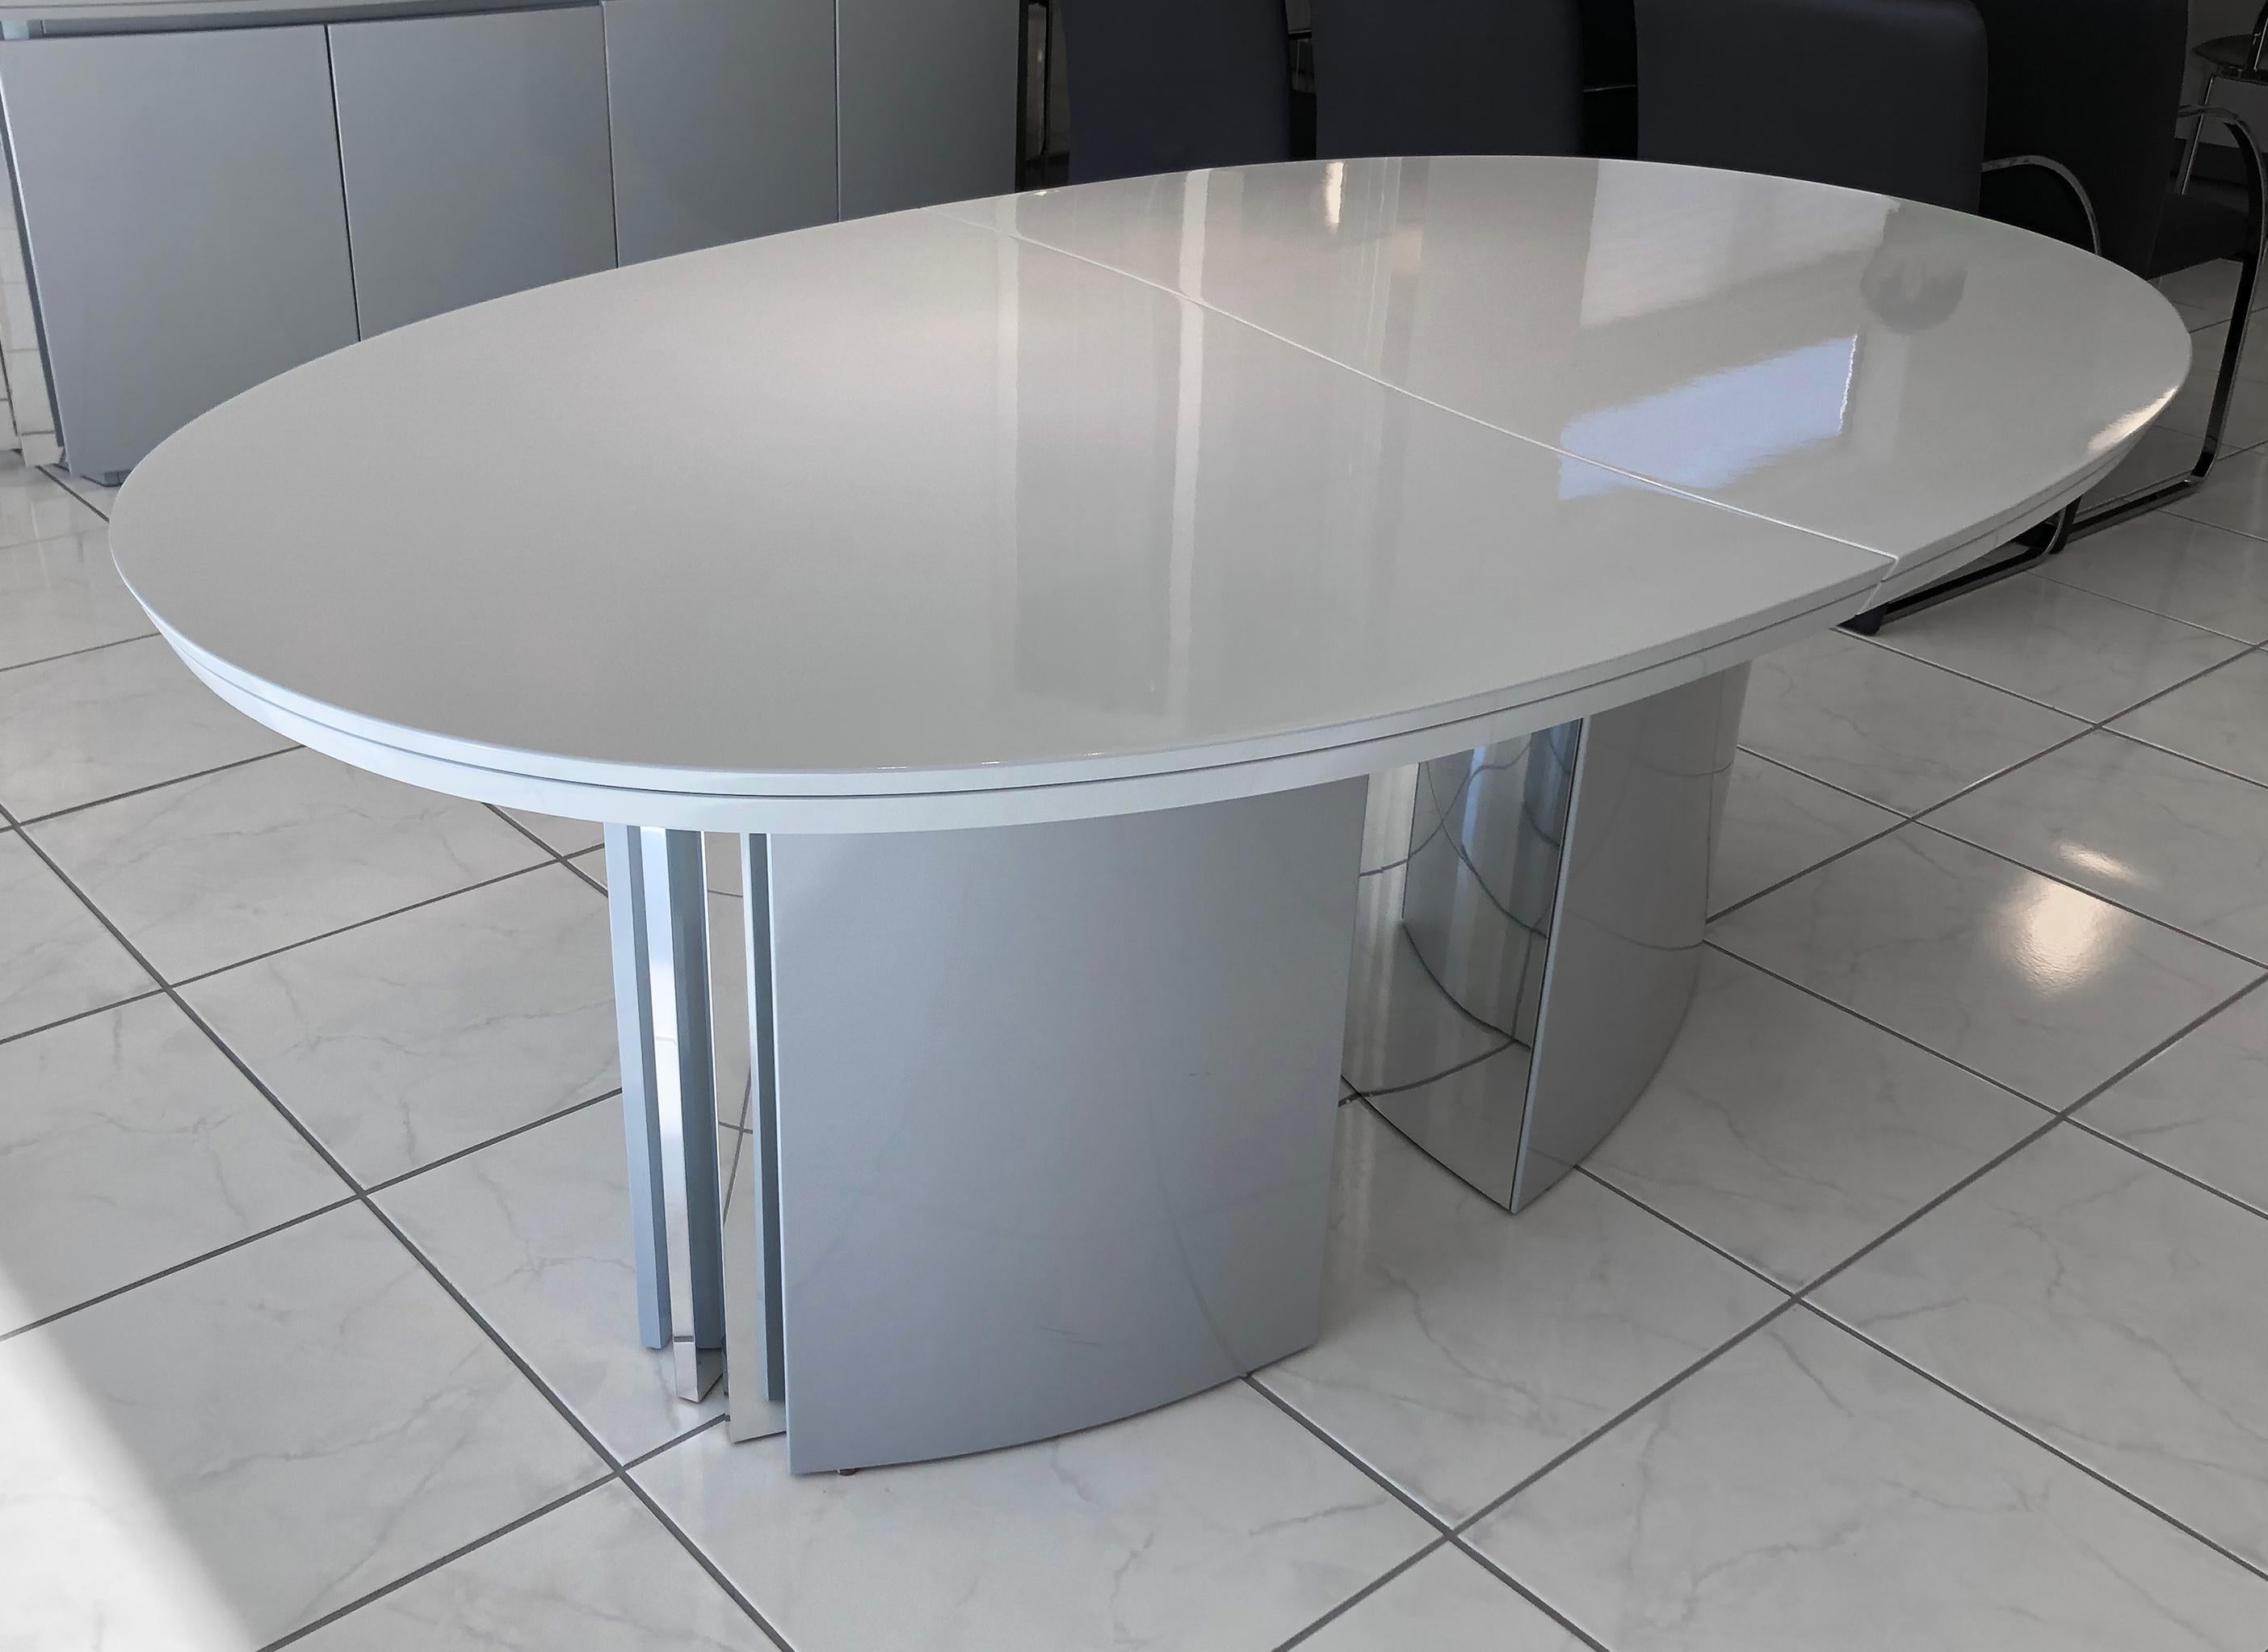 Available right now, we have this absolutely stunning Rougier dining table. The dining table features a 